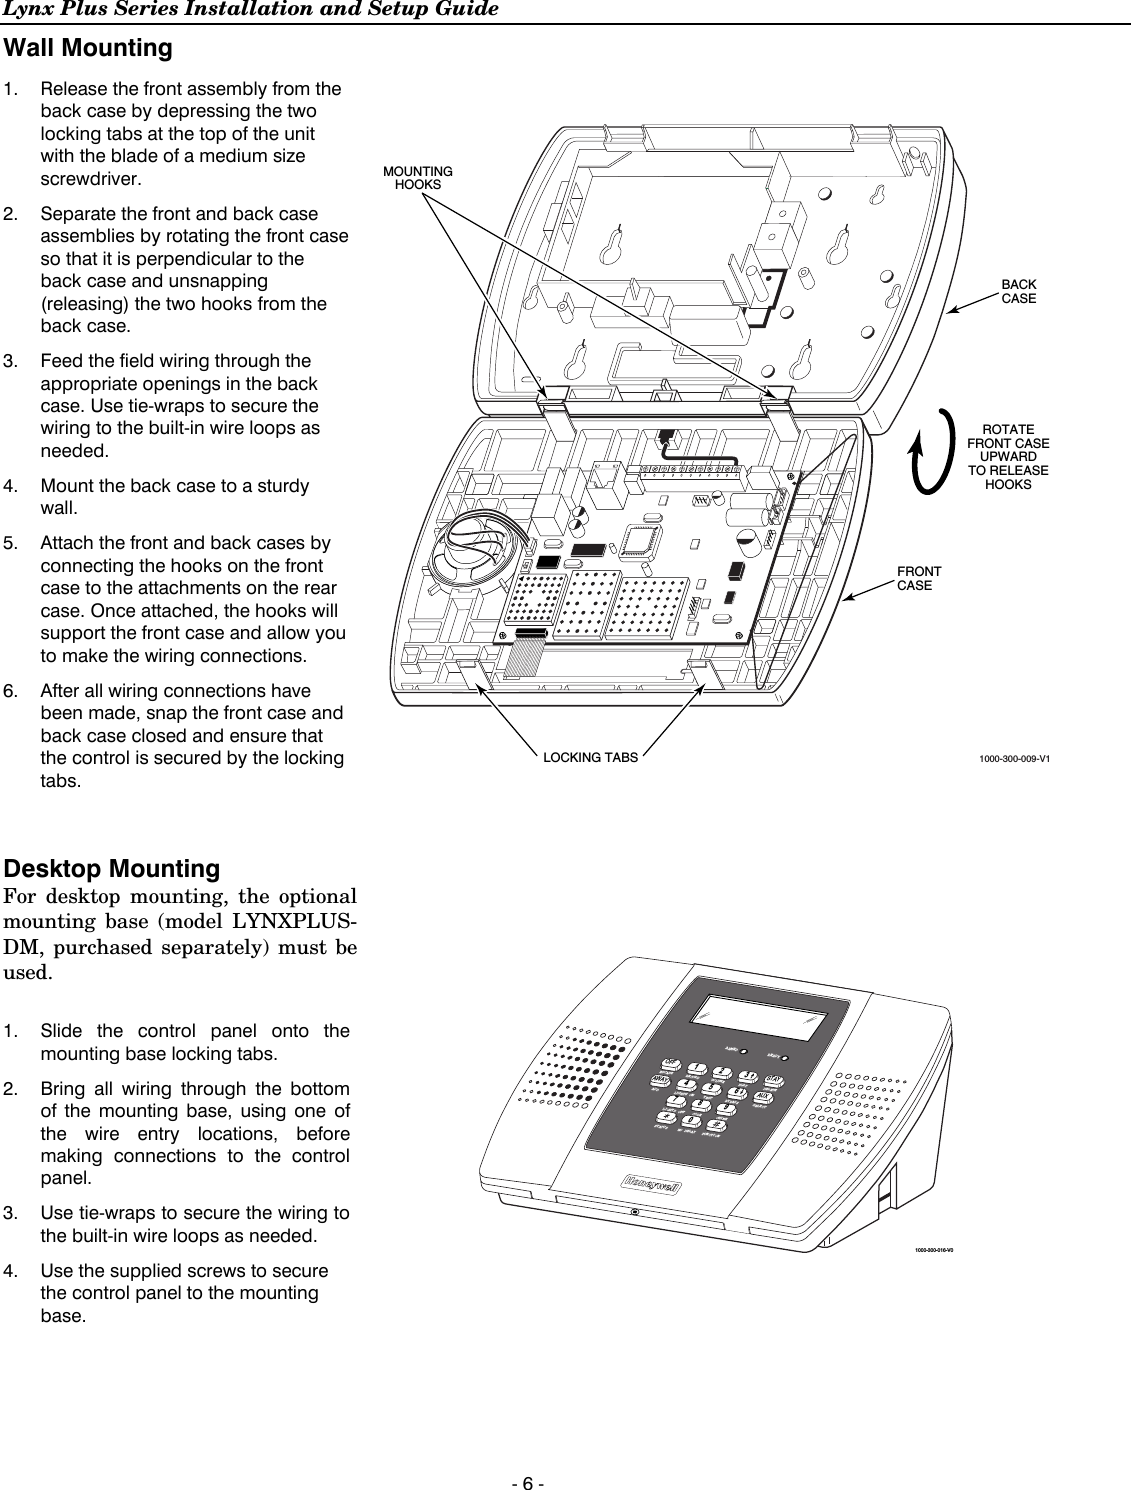 Lynx Plus Series Installation and Setup Guide  - 6 - Wall Mounting  1.  Release the front assembly from the back case by depressing the two locking tabs at the top of the unit with the blade of a medium size screwdriver. 2.  Separate the front and back case assemblies by rotating the front case so that it is perpendicular to the back case and unsnapping (releasing) the two hooks from the back case.  3.   Feed the field wiring through the appropriate openings in the back case. Use tie-wraps to secure the wiring to the built-in wire loops as needed. 4.   Mount the back case to a sturdy wall. 5.  Attach the front and back cases by connecting the hooks on the front case to the attachments on the rear case. Once attached, the hooks will support the front case and allow you to make the wiring connections. 6.  After all wiring connections have been made, snap the front case and back case closed and ensure that the control is secured by the locking tabs.  BACKCASEFRONTCASE1000-300-009-V1ROTATEFRONT CASEUPWARDTO RELEASEHOOKSMOUNTINGHOOKSLOCKING TABS  Desktop Mounting For desktop mounting, the optional mounting base (model LYNXPLUS-DM, purchased separately) must be used.  1.  Slide the control panel onto the mounting base locking tabs. 2.  Bring all wiring through the bottom of the mounting base, using one of the wire entry locations, before making connections to the control panel. 3.  Use tie-wraps to secure the wiring to the built-in wire loops as needed.  4.  Use the supplied screws to secure the control panel to the mounting base.  BYPASSNO DELAYRECORDTESTFUNCTIONSTATUSVOLUME PLAYCODELIGHTS ONLIGHTS OFF CHIMEESCAPEADDDELETESELECTOFF STAY1 32AWAY AUX465ARMED READY79801000-300-016-V0  